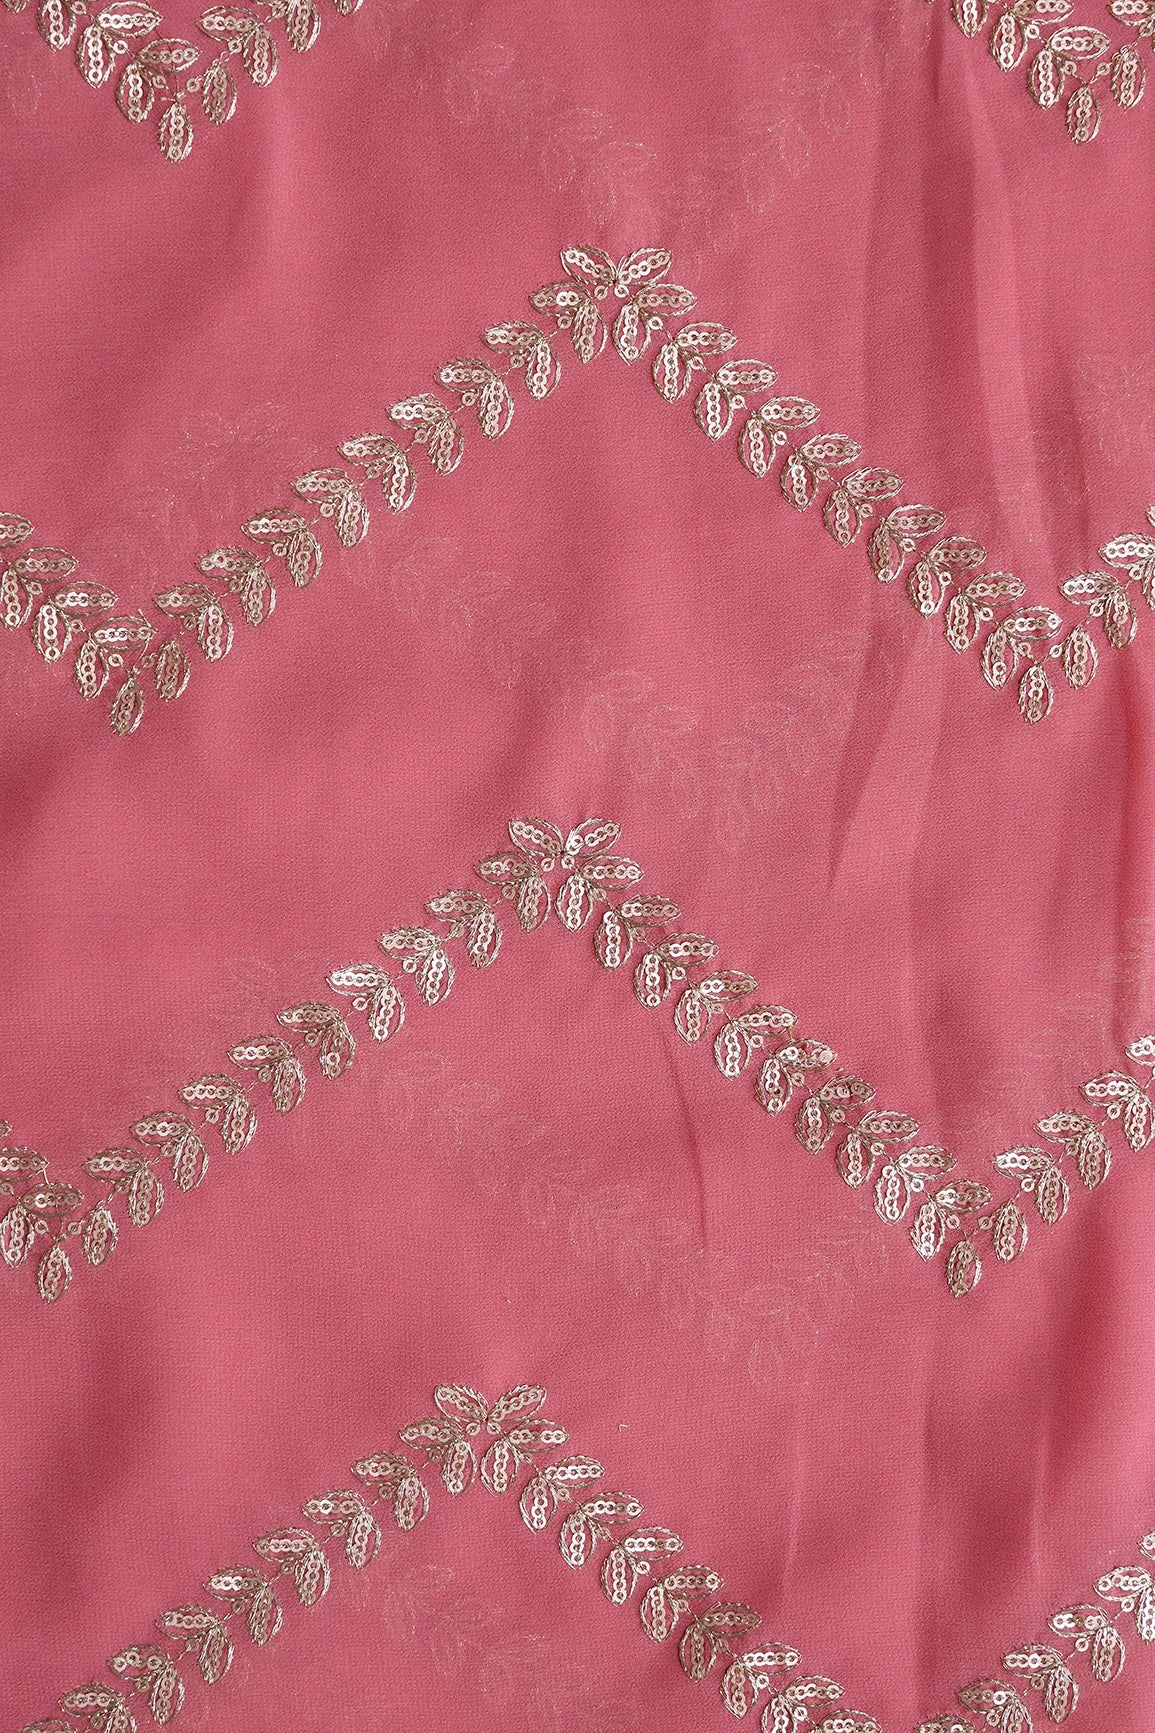 Gold Zari With Gold Sequins Chevron Embroidery Work On Gajri Pink Georgette Fabric